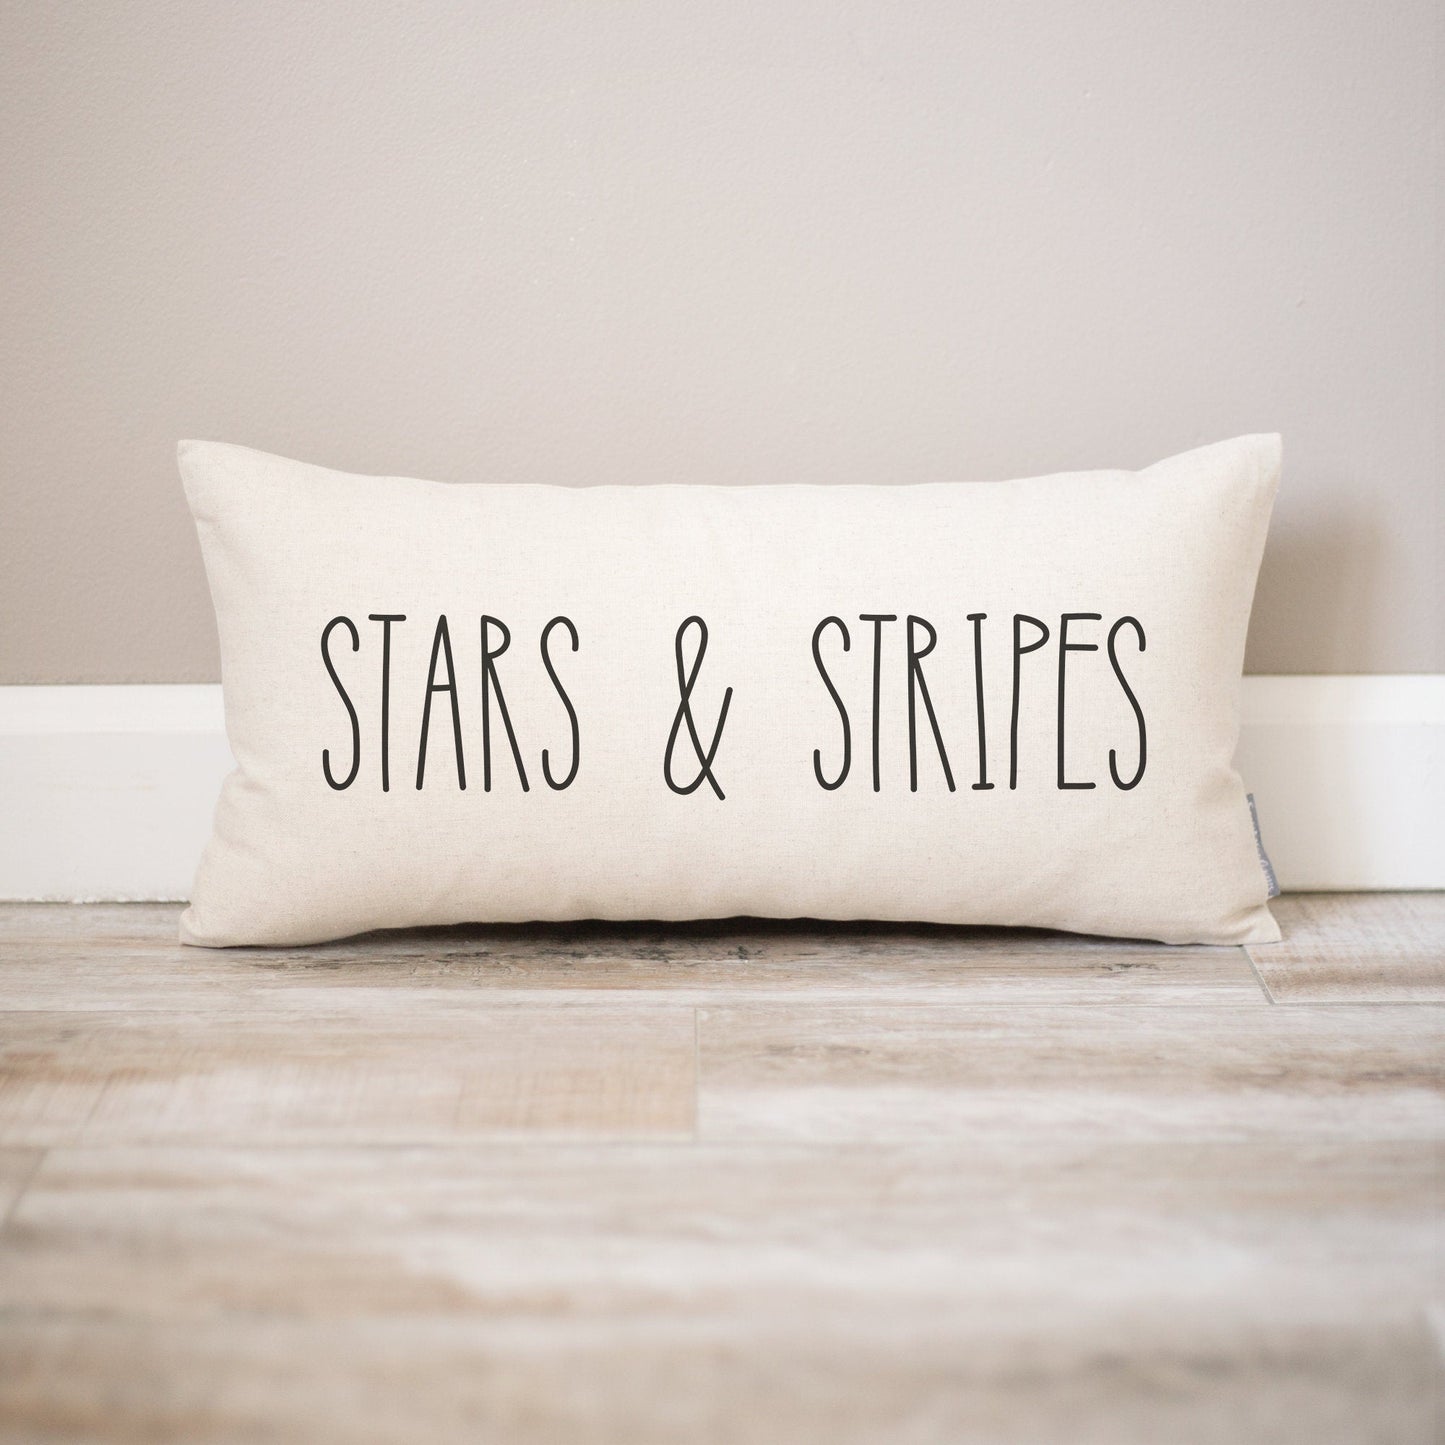 Stars and Stripes Pillow | Forth of July Decorations | 4th of July Decor Pillow | Independence Day Home Decorations 4th of July Decor Pillow - Sweet Hooligans Design